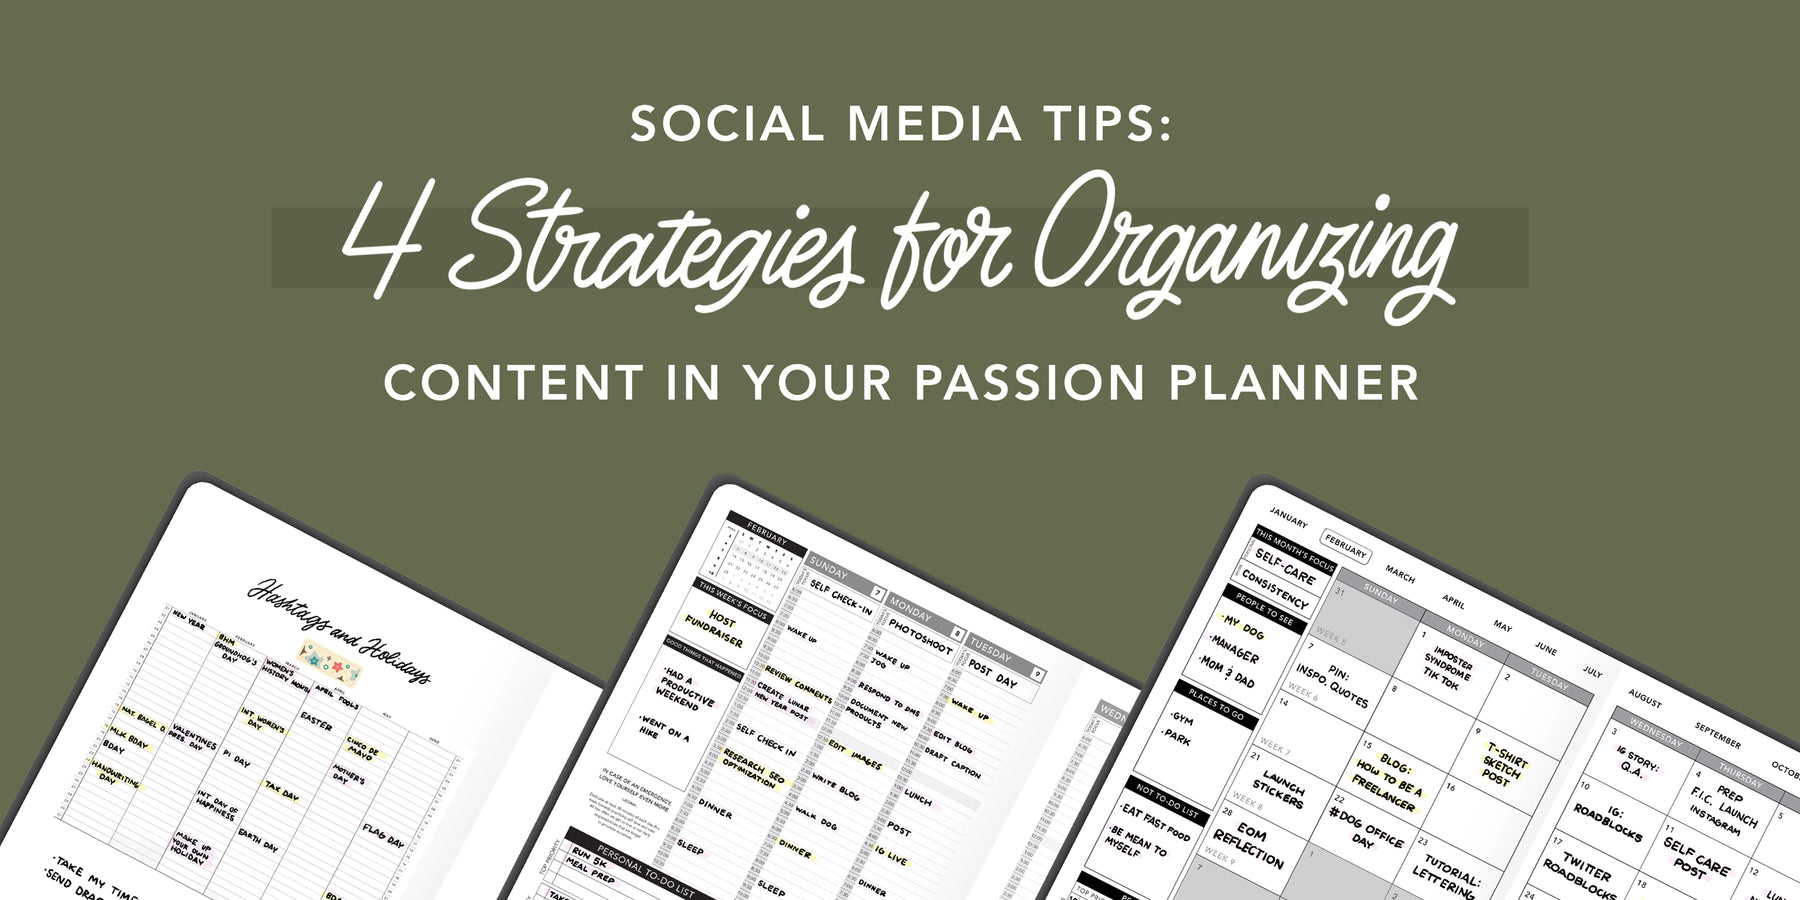 Social Media Planner Tips: 4 Strategies for Organizing Your Content in Your Passion Planner